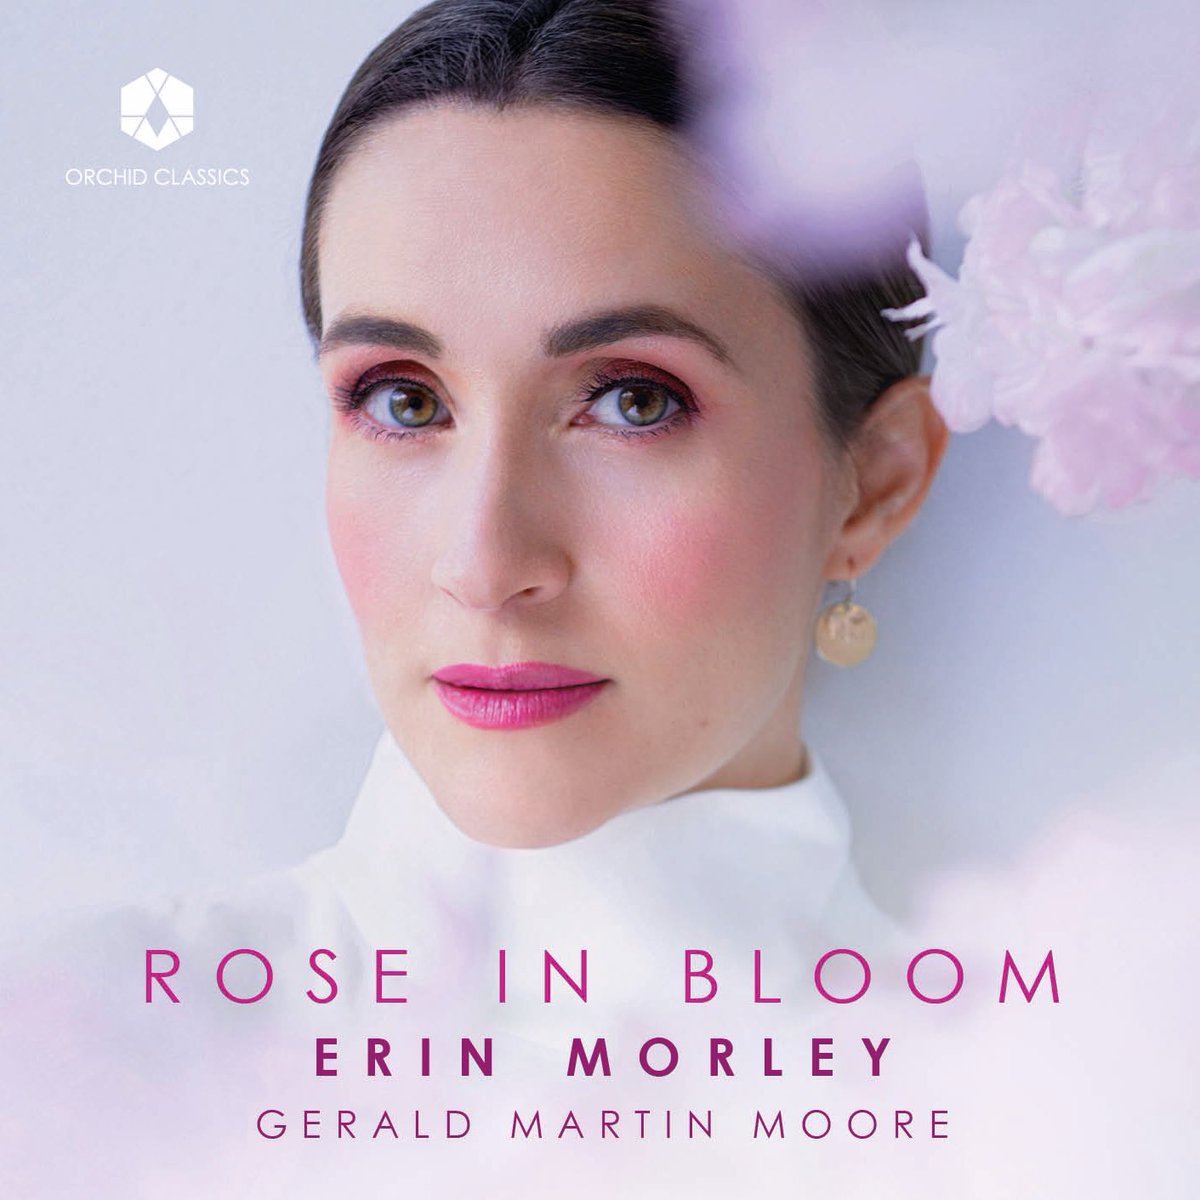 Today’s the day 😭🥹🙌 🌹 ROSE IN BLOOM 🌹 is available now for purchase and streaming on all platforms! #GeraldMartinMoore @RickyIanGordon 💿 @OrchidClassics 📸 Chris Gonz 💄 @glowbyaffan 🎨 @lennysstudio orchid-music.lnk.to/RoseInBloom?fb…